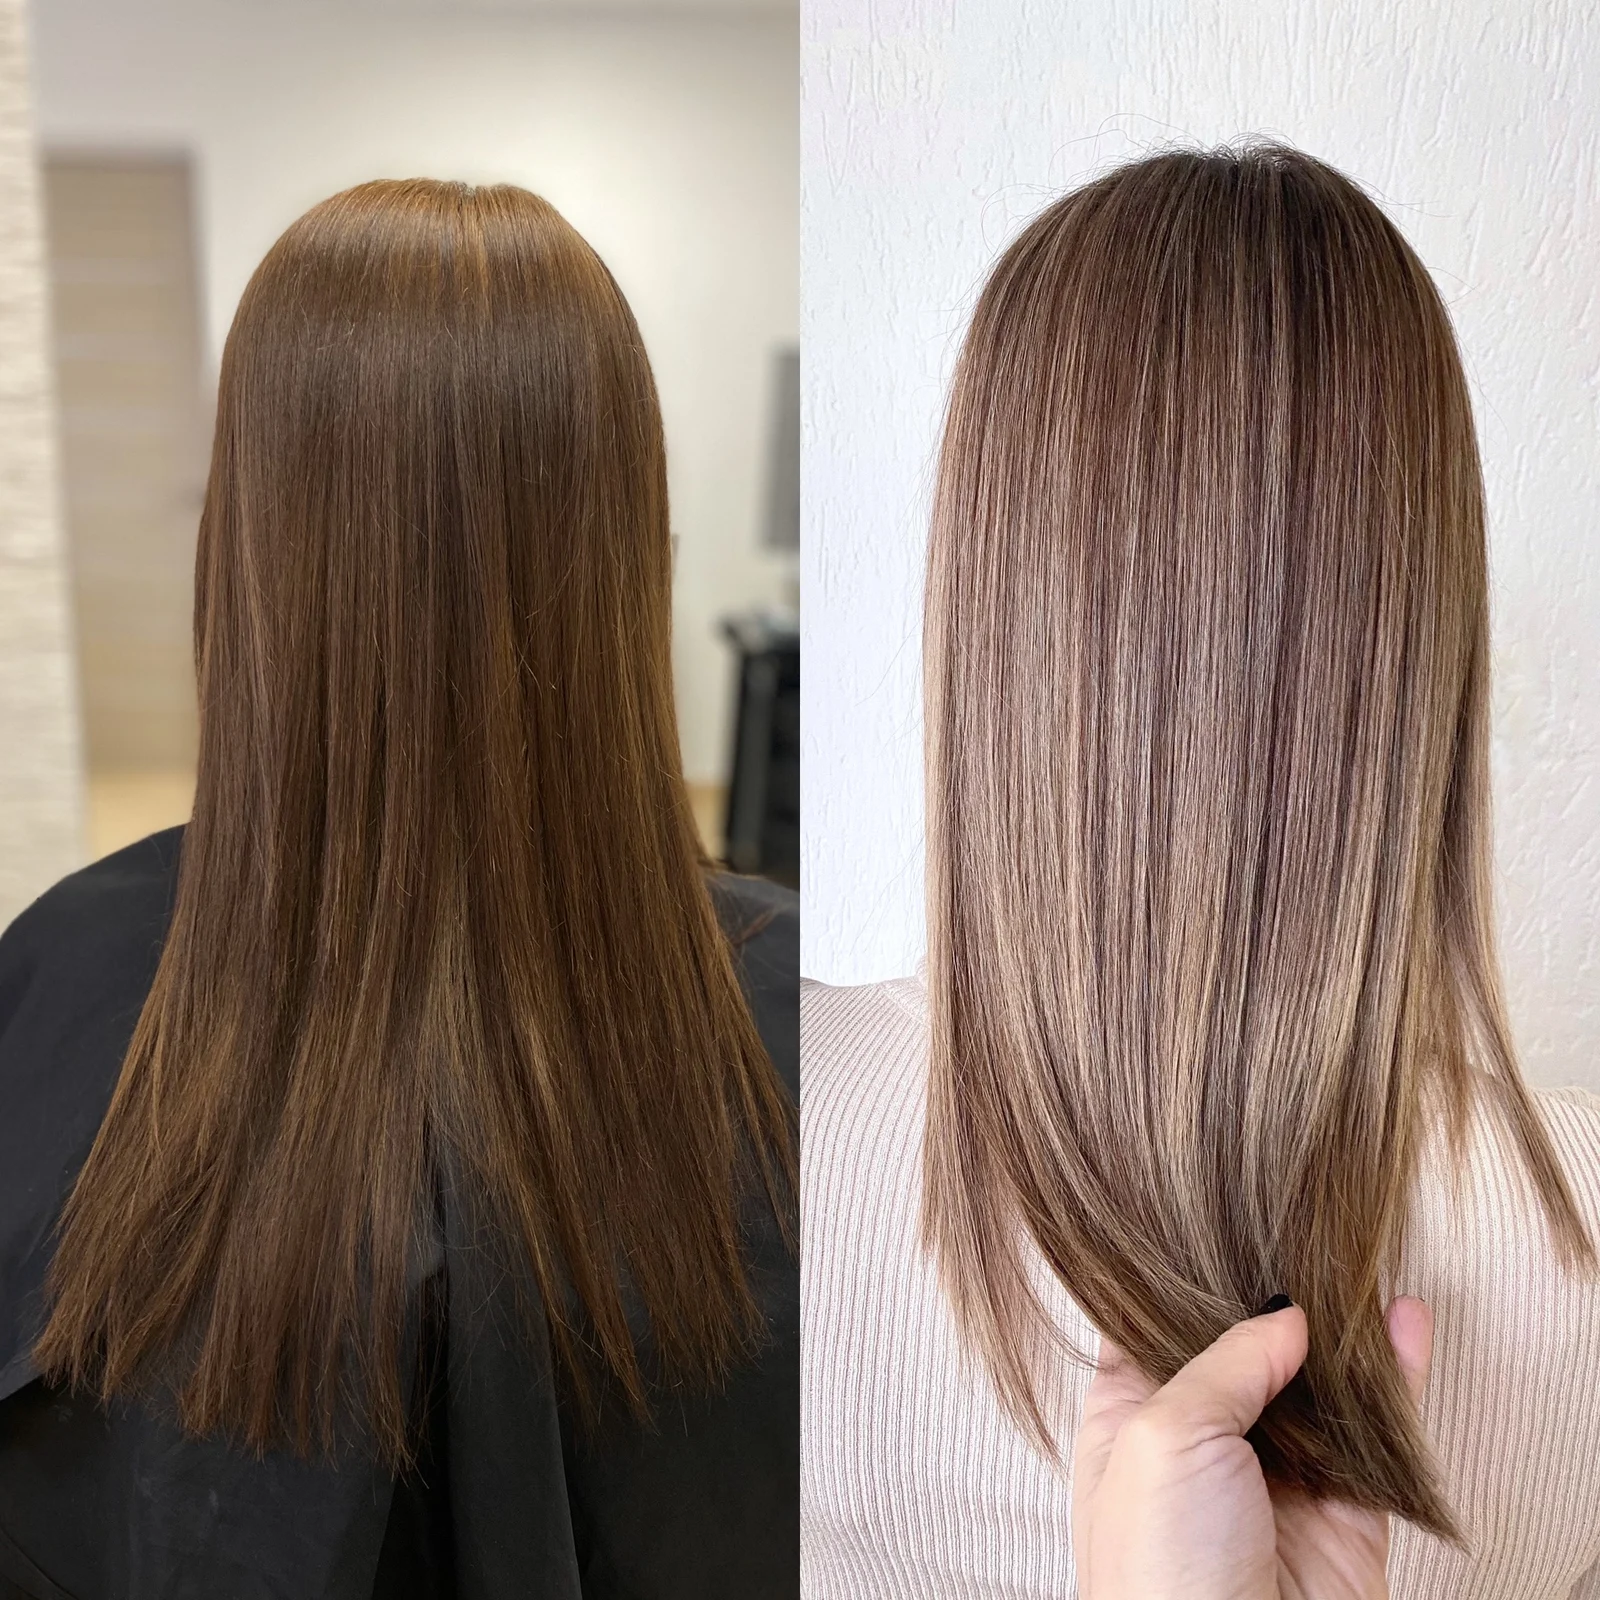 Chestnut Brown to Subtle Cool-Toned Blonde Balayage